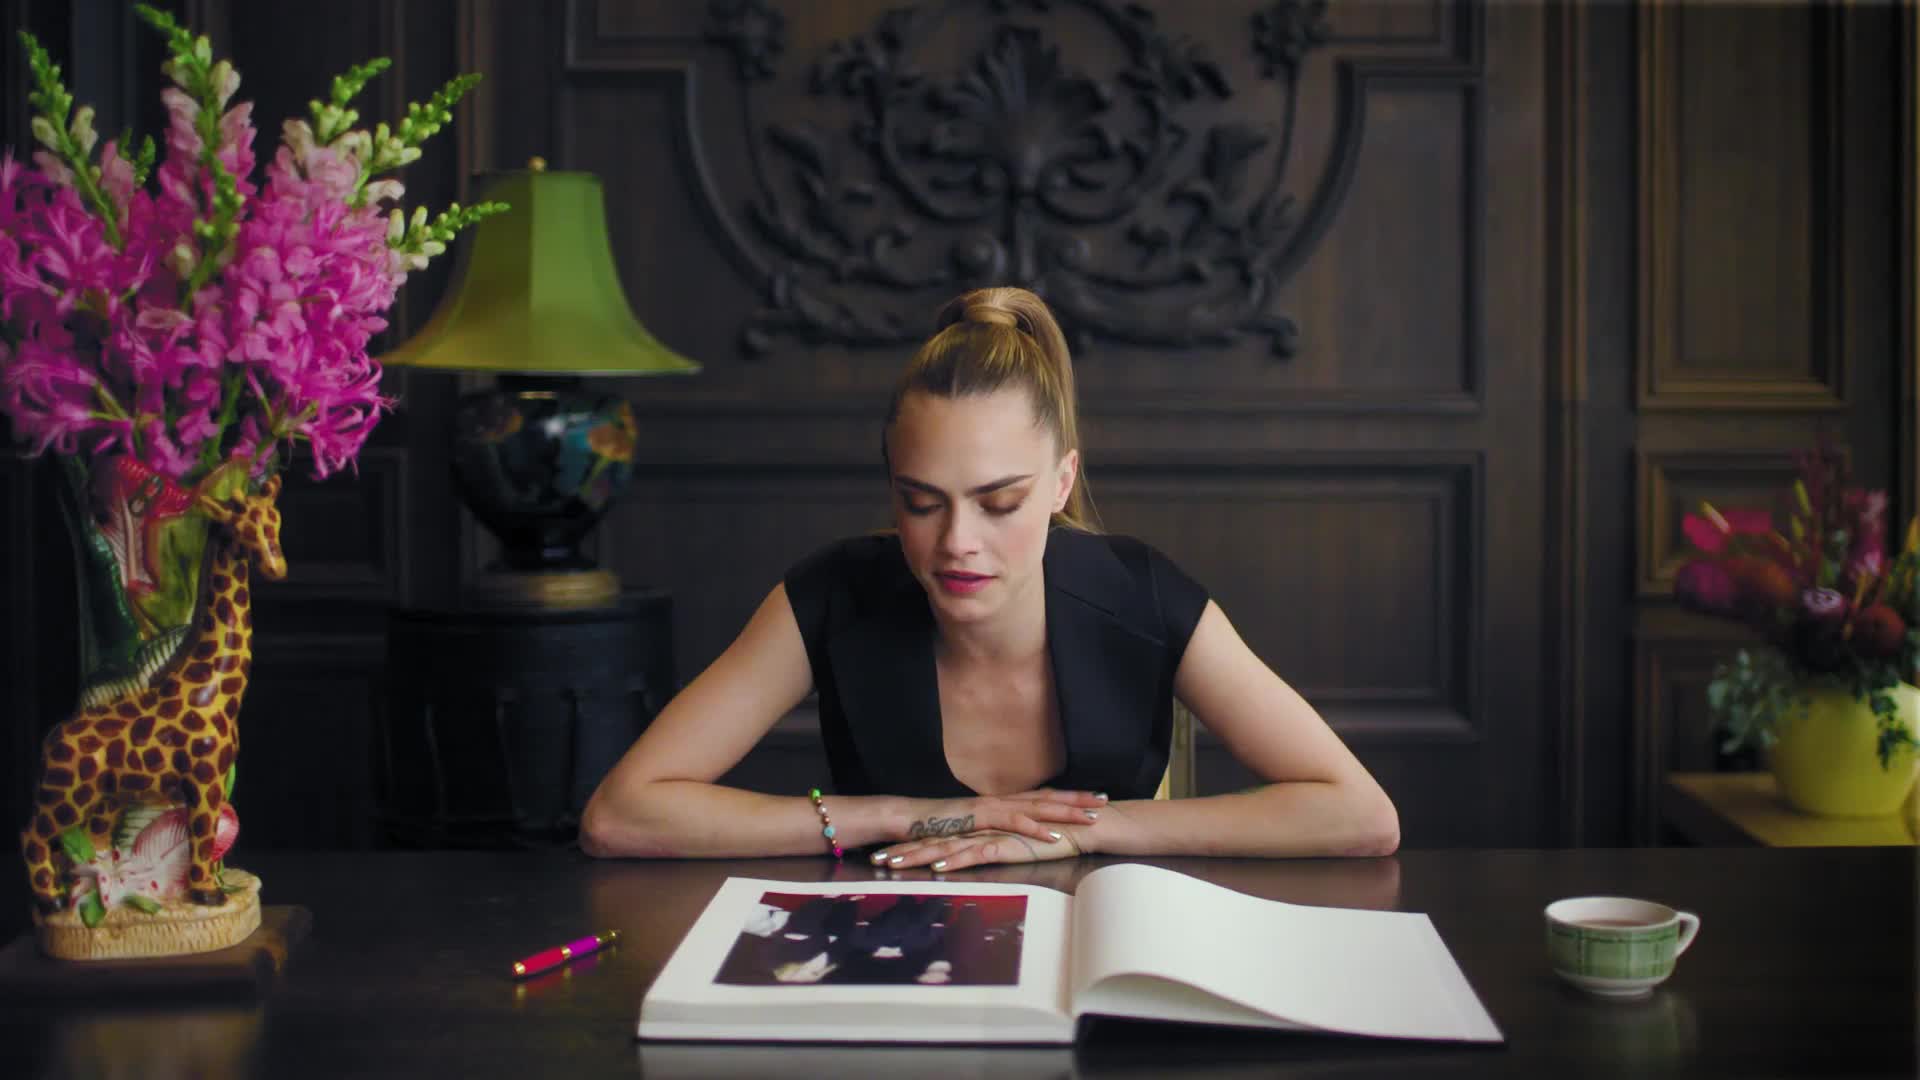 Vogue Cara Delevingne “I Was Not Ok Starts Over” Issue April 2023 Magazine  Perfume Inserts CoCo Chanel FlowerBomb Viktor & Rolf Dylan Purple Versace K  Q Dolce & Gabbana by Vogue, Paperback